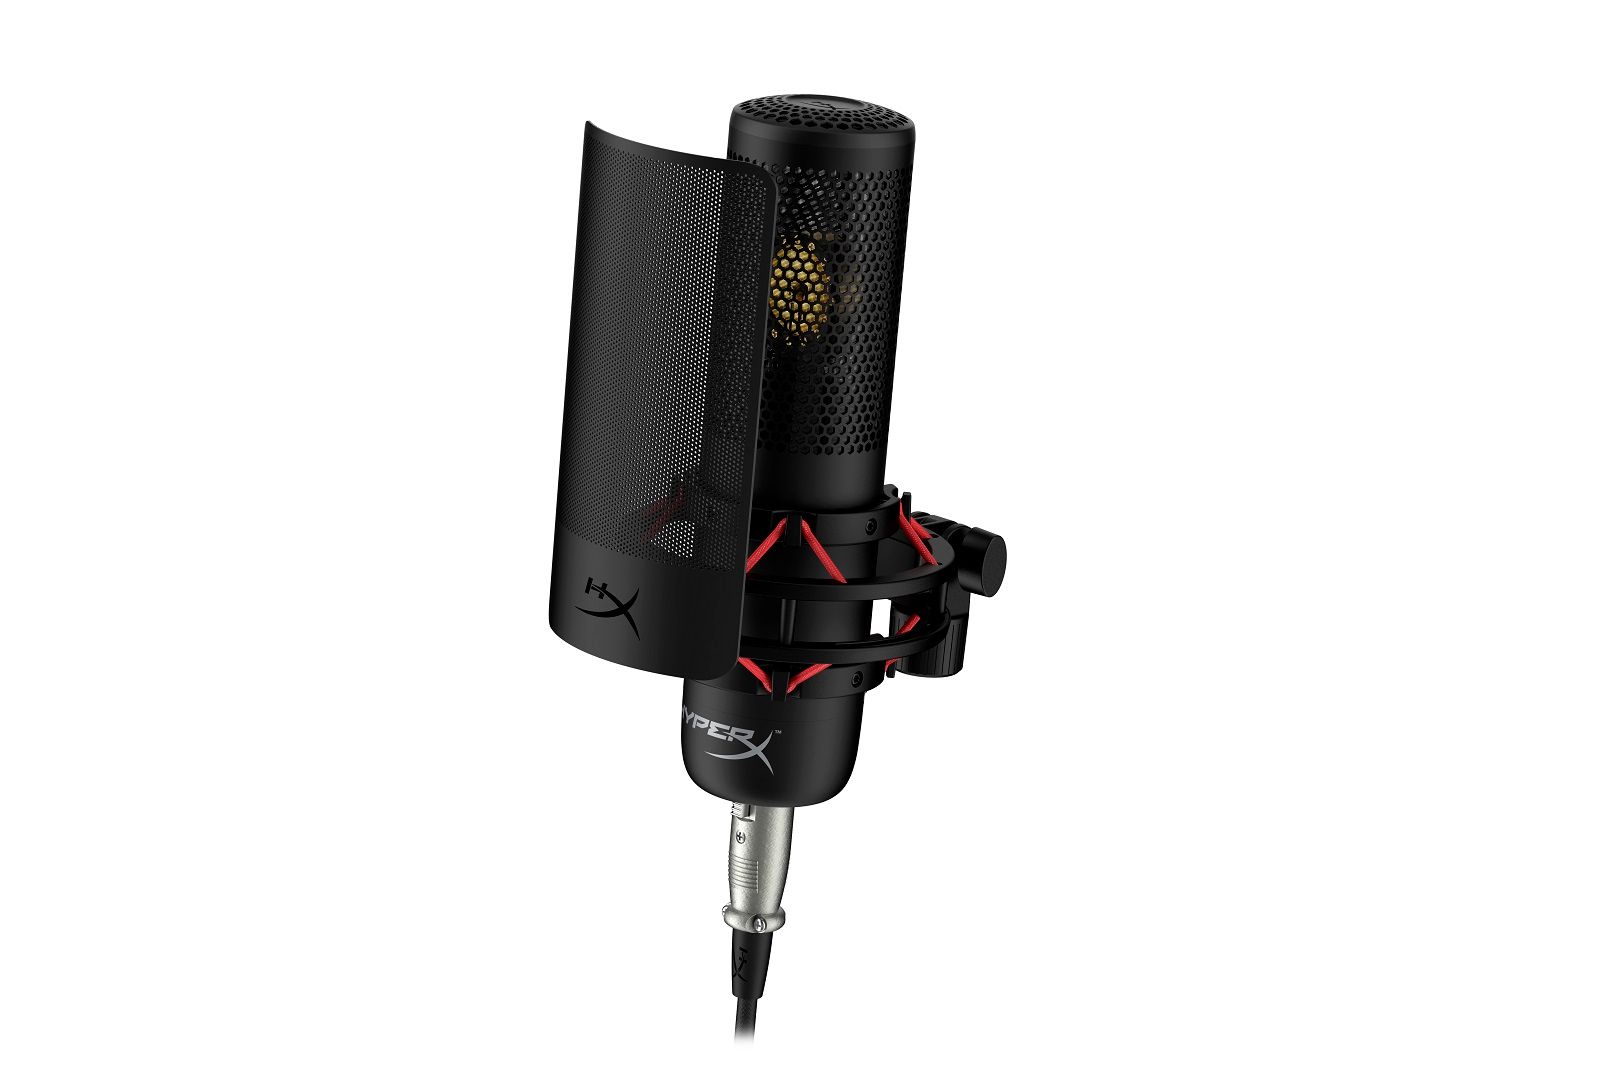 The HyperX ProCast is an XLR microphone aimed at streamers and content creators photo 1